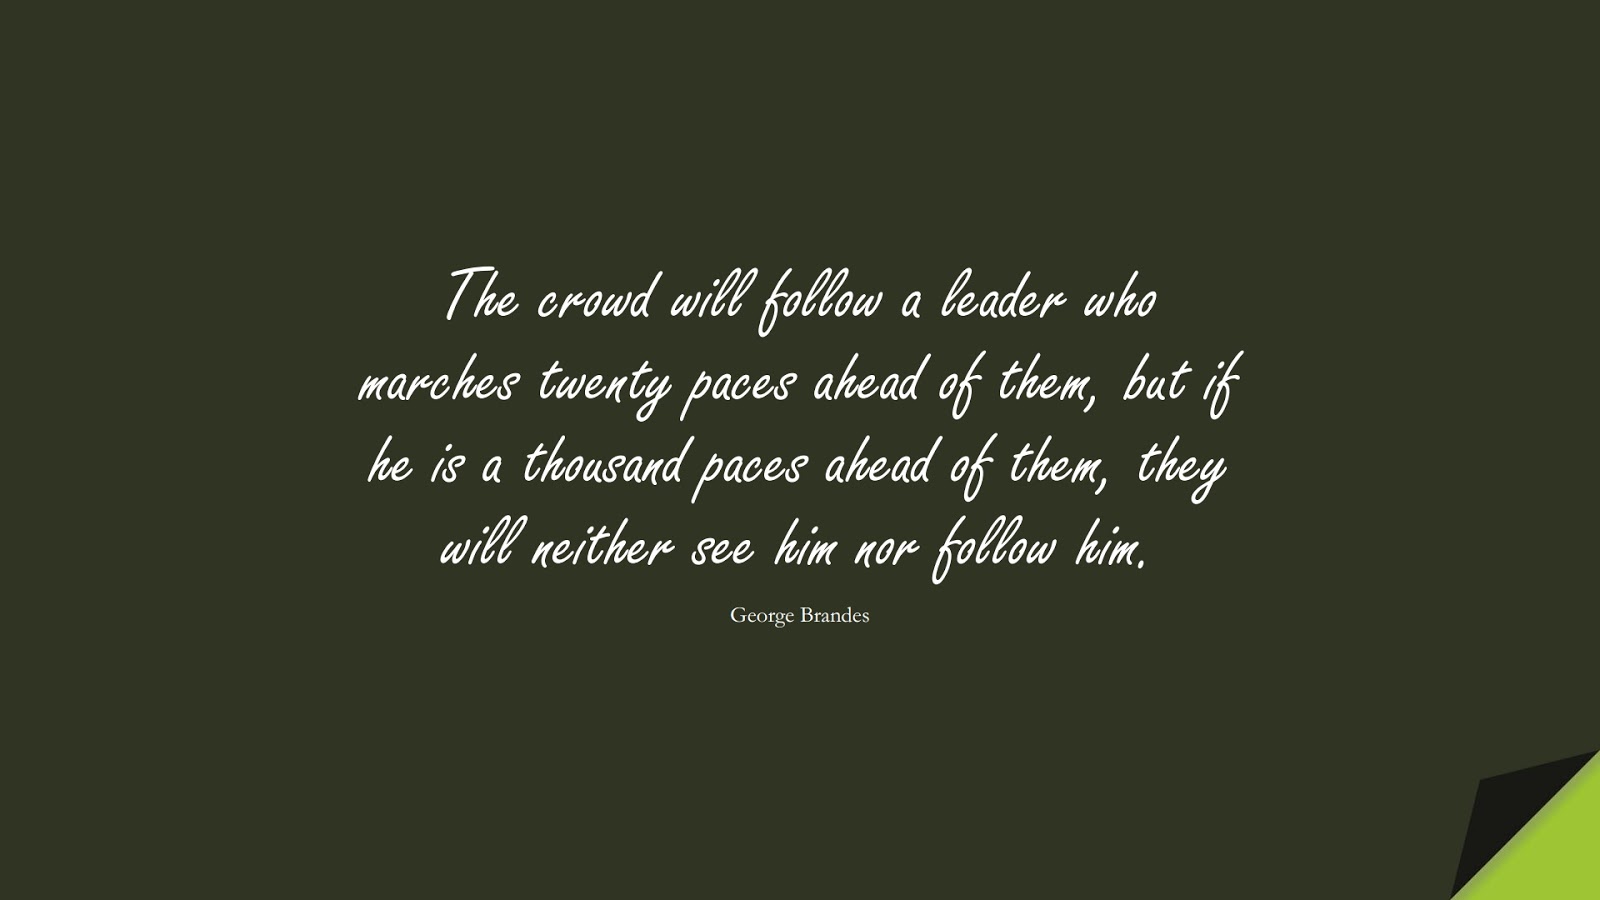 The crowd will follow a leader who marches twenty paces ahead of them, but if he is a thousand paces ahead of them, they will neither see him nor follow him. (George Brandes);  #InspirationalQuotes